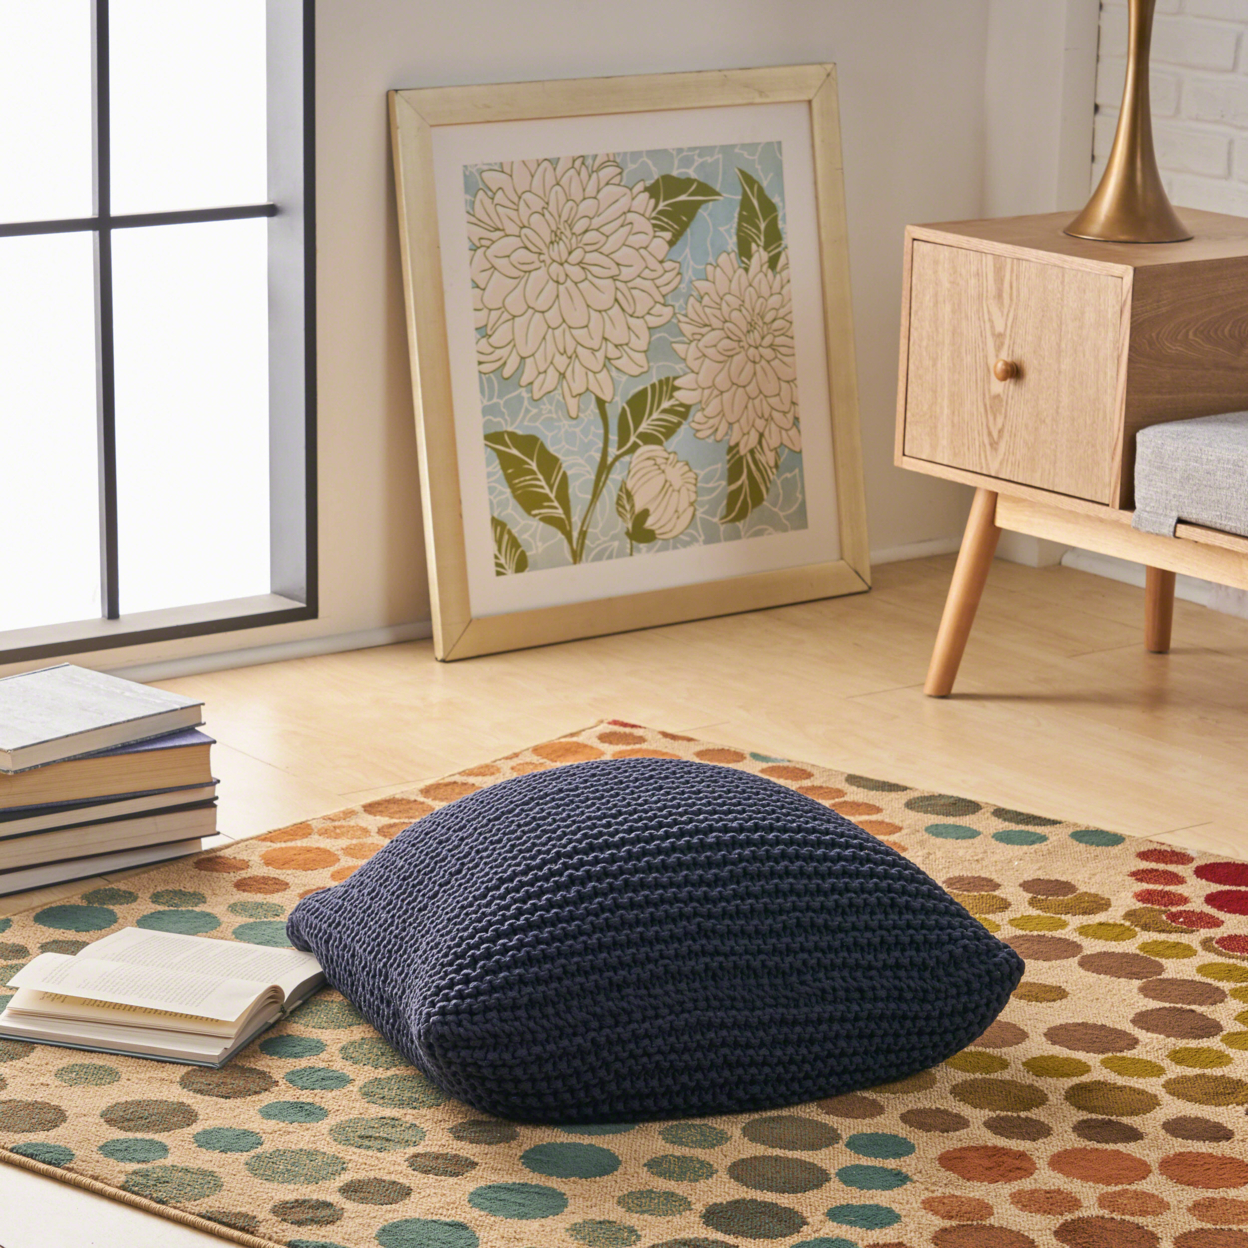 Cary Knitted Cotton Floor Cushion - Navy